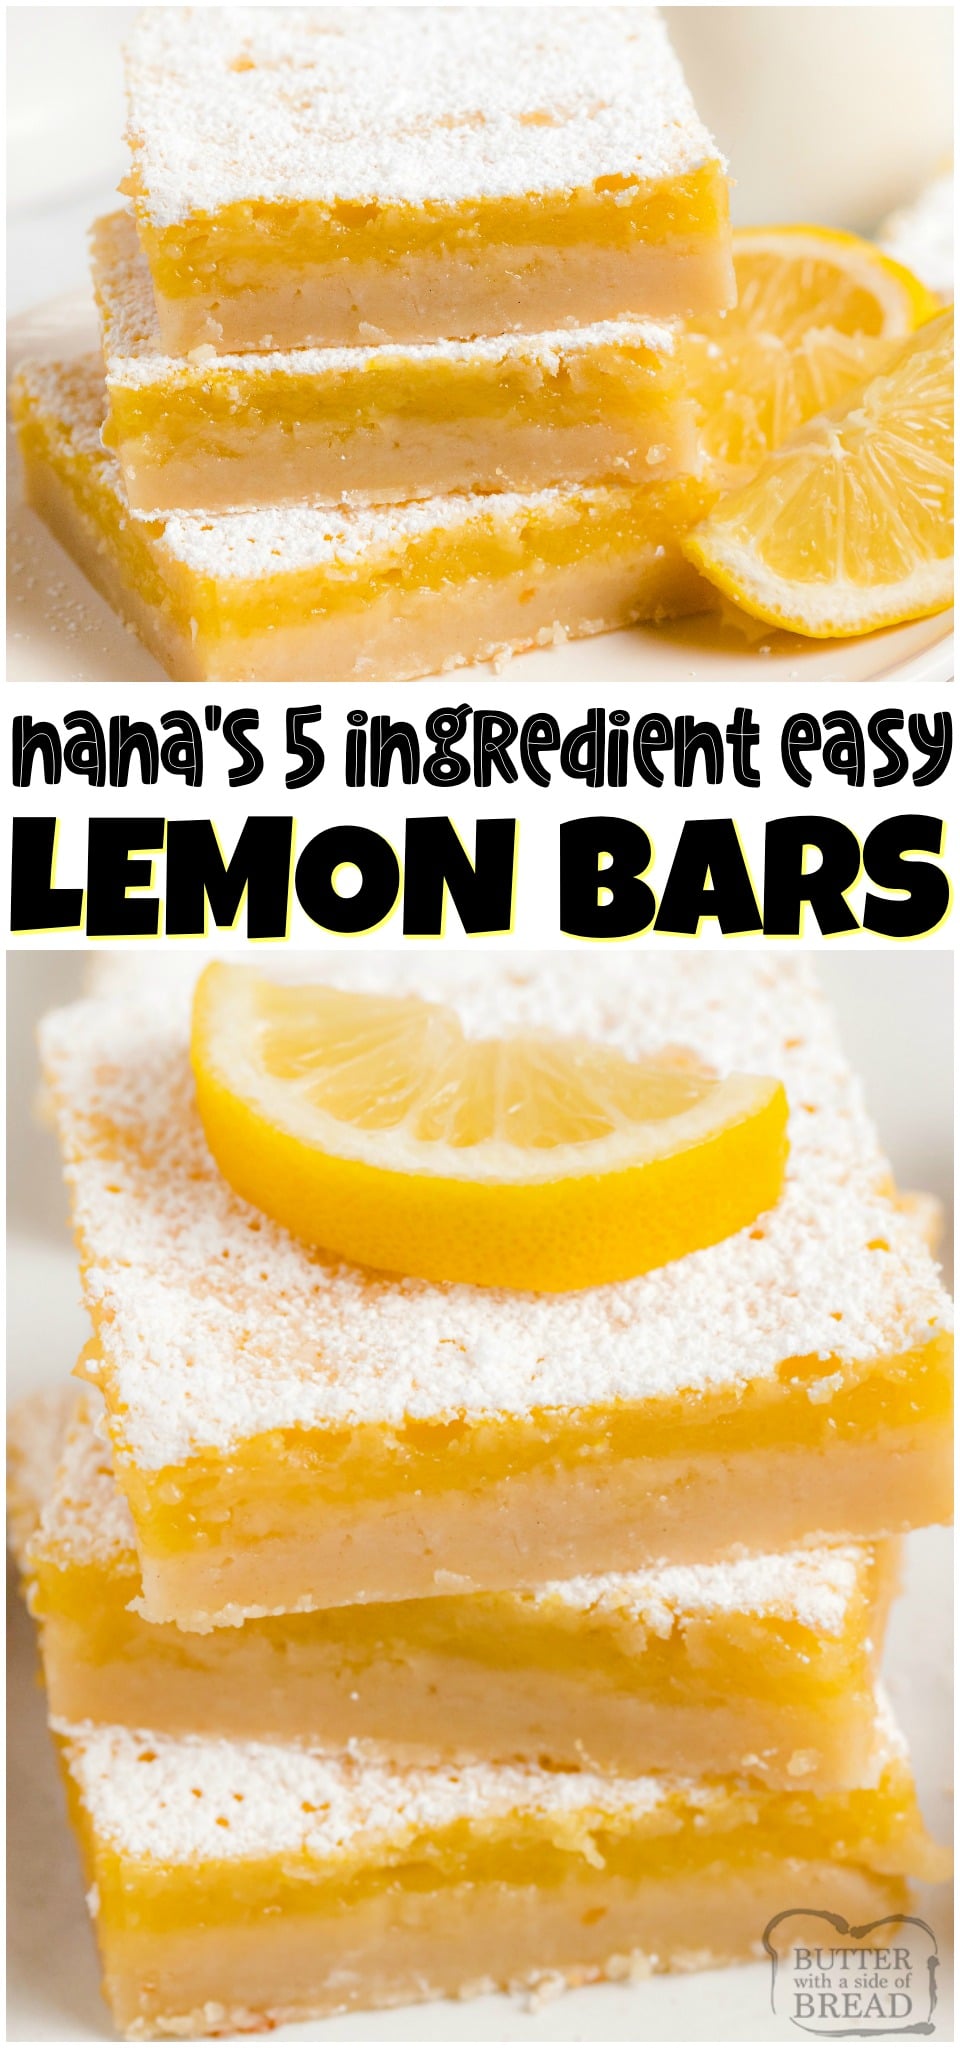 Easy Lemon Bars made with just 5 ingredients! Homemade Lemon Bars recipe made with butter, sugar, eggs and lemon juice for a tasty, tangy lemon dessert! #lemon #lemonbars #dessert #easyrecipe #easy #lemons #baking #recipe from BUTTER WITH A SIDE OF BREAD